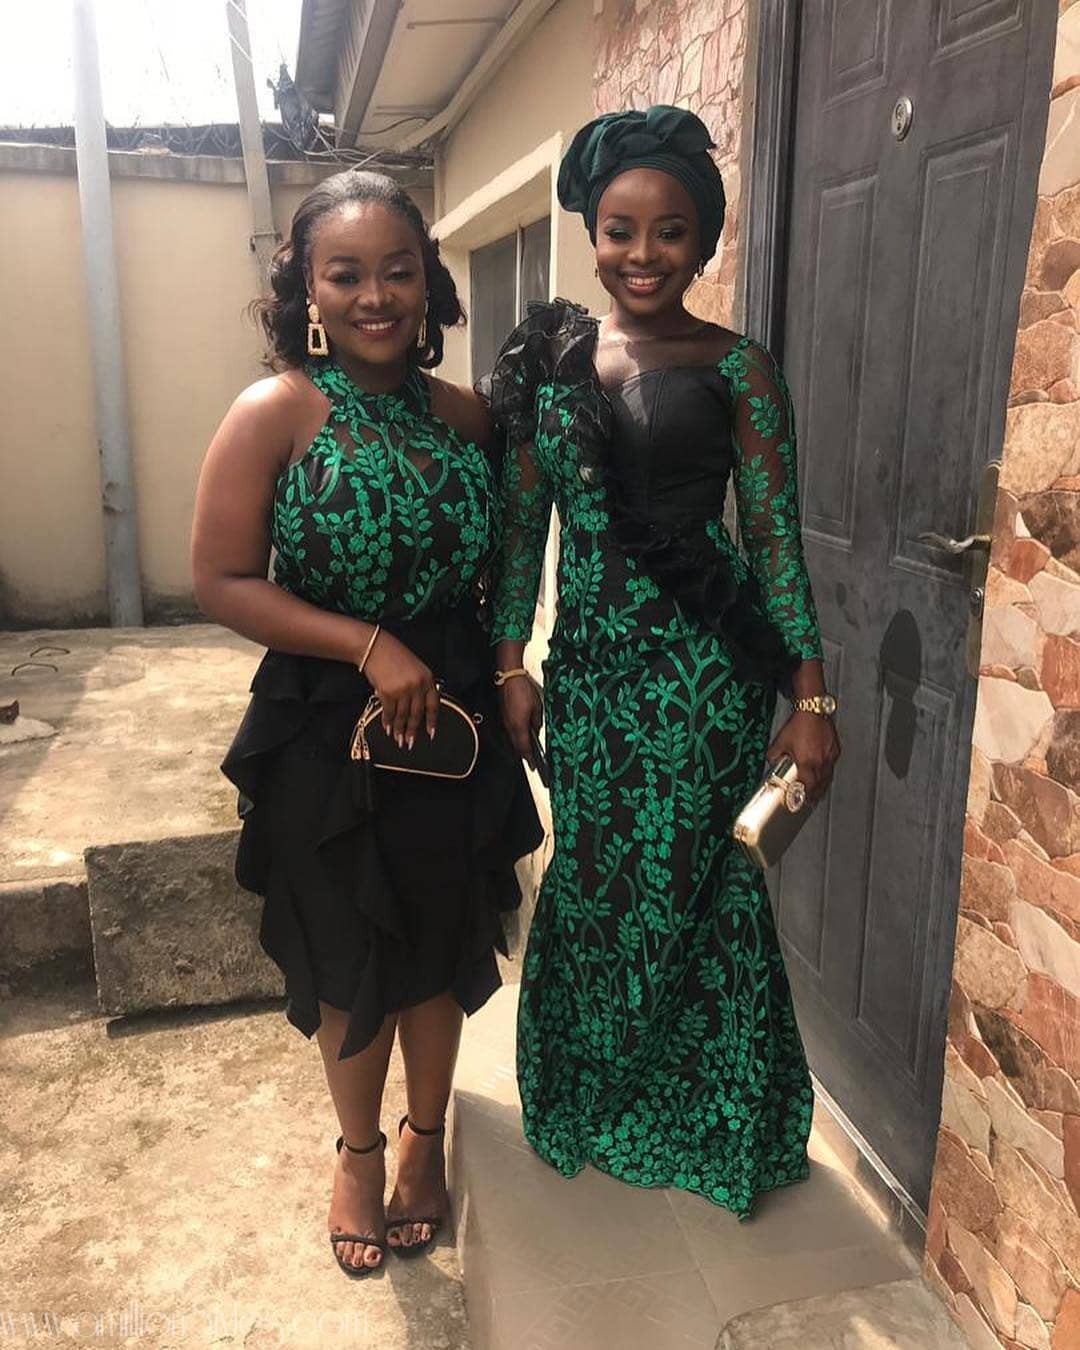 The Most Popular Color Of Asoebi Lace In 2018 Was Green